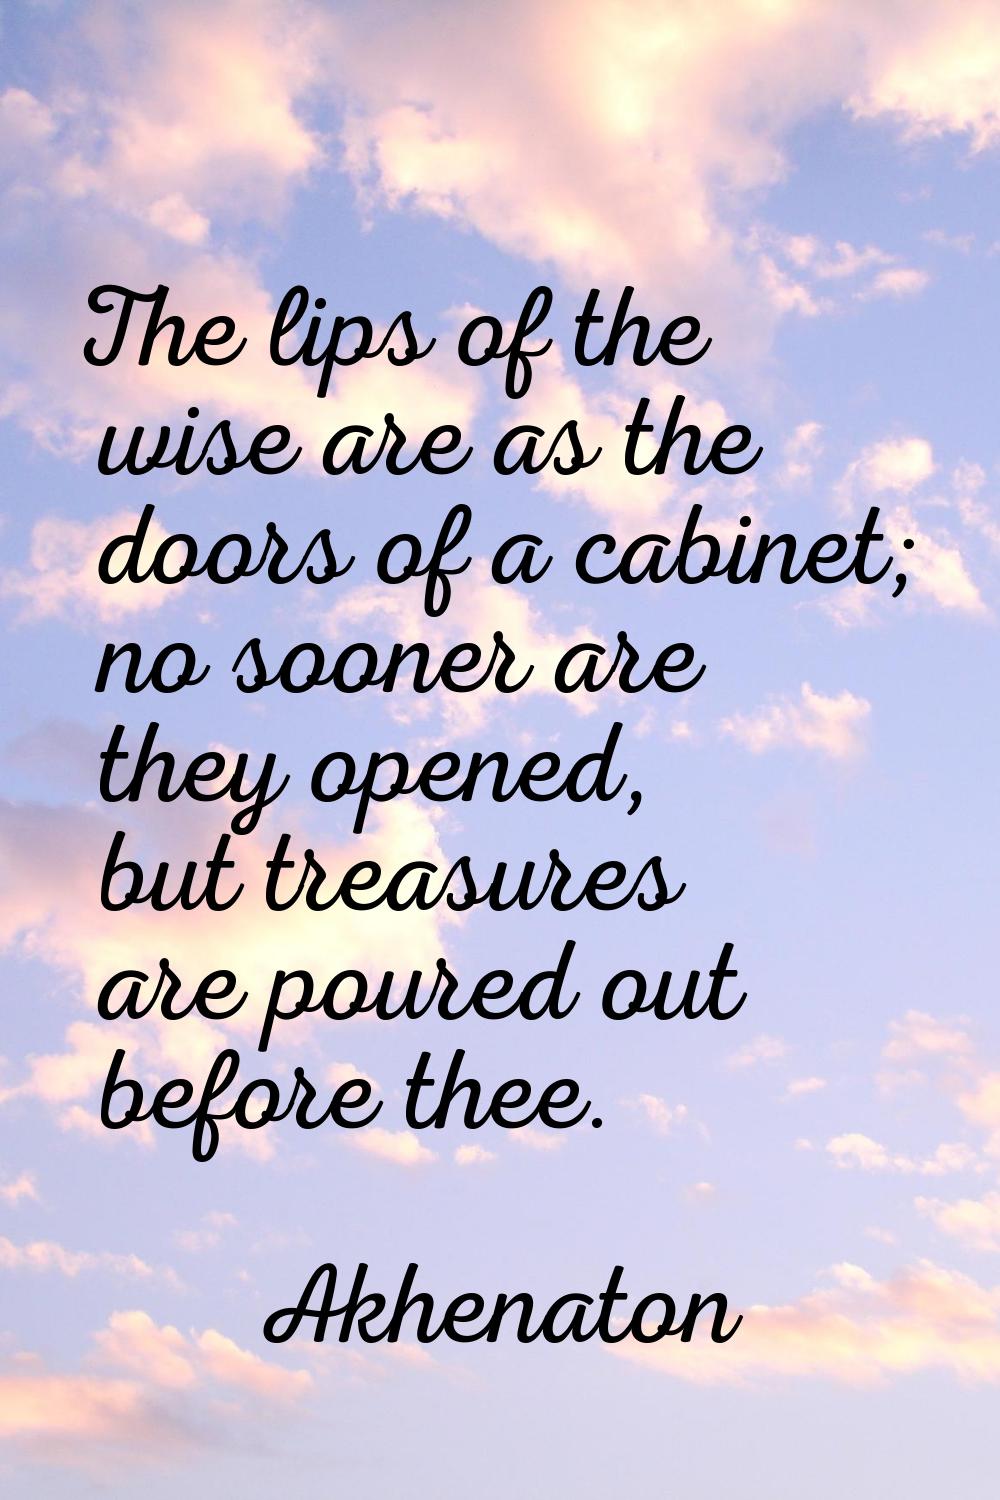 The lips of the wise are as the doors of a cabinet; no sooner are they opened, but treasures are po